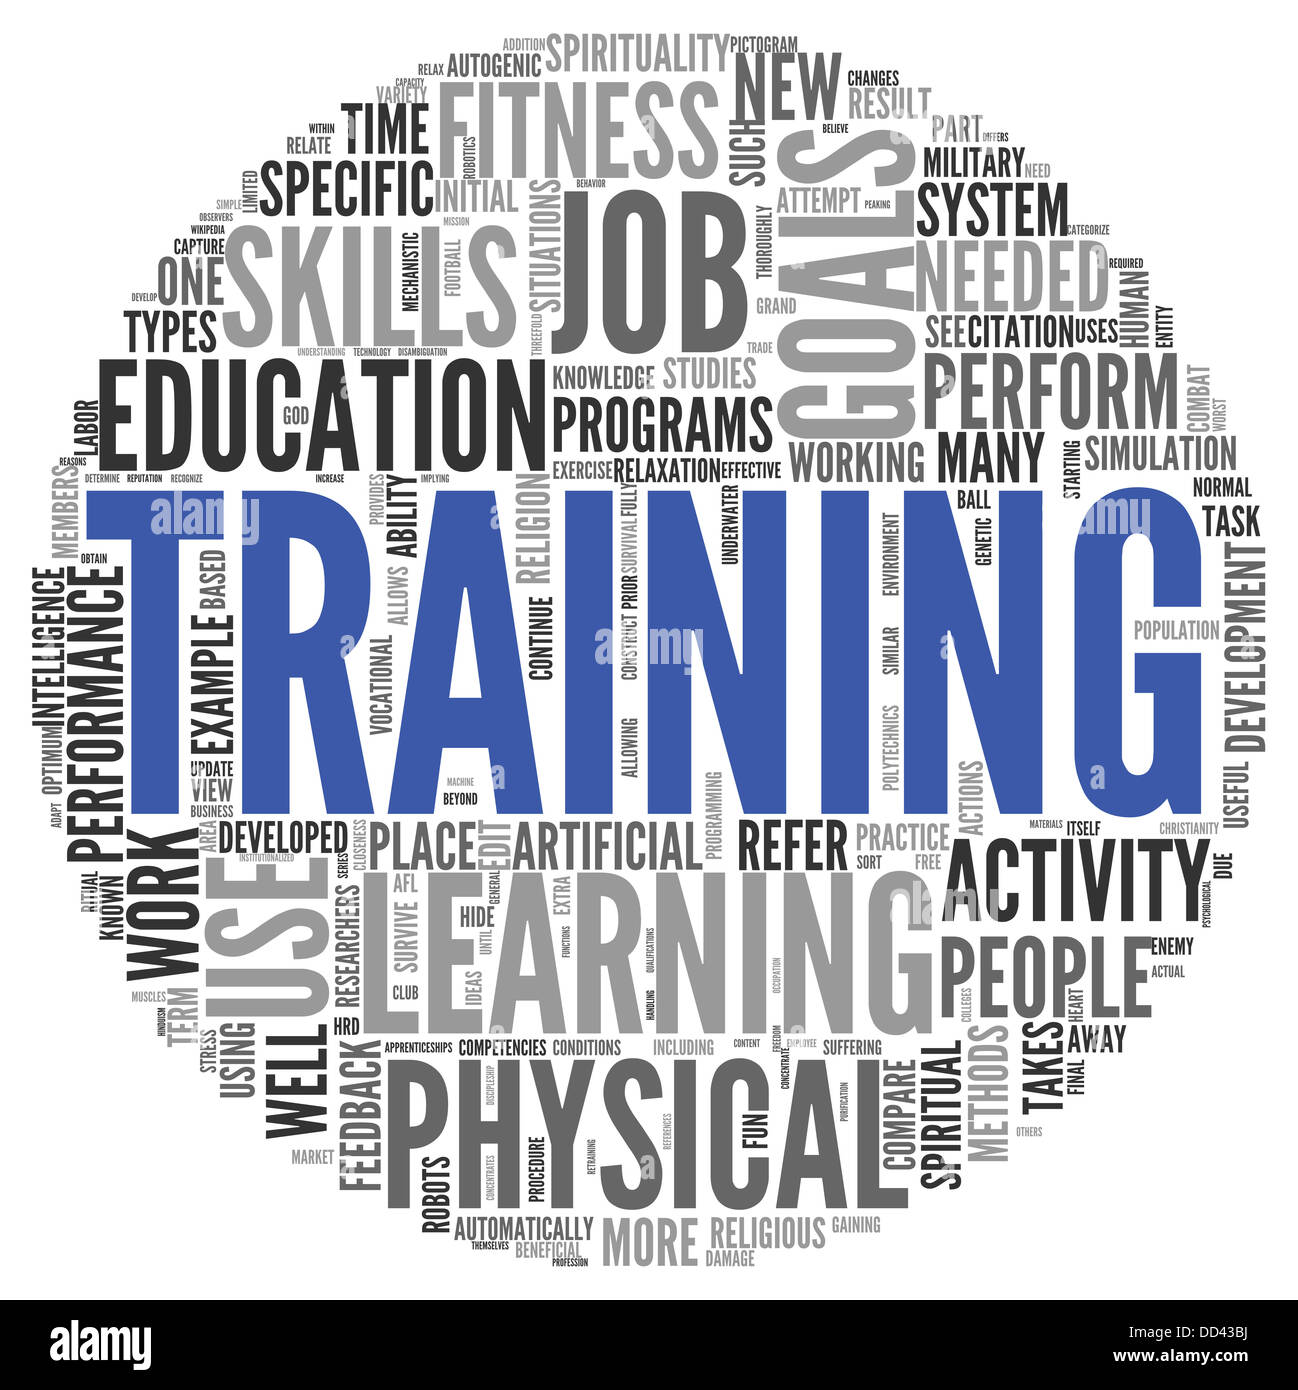 Training and education related words concept in tag cloud Stock Photo